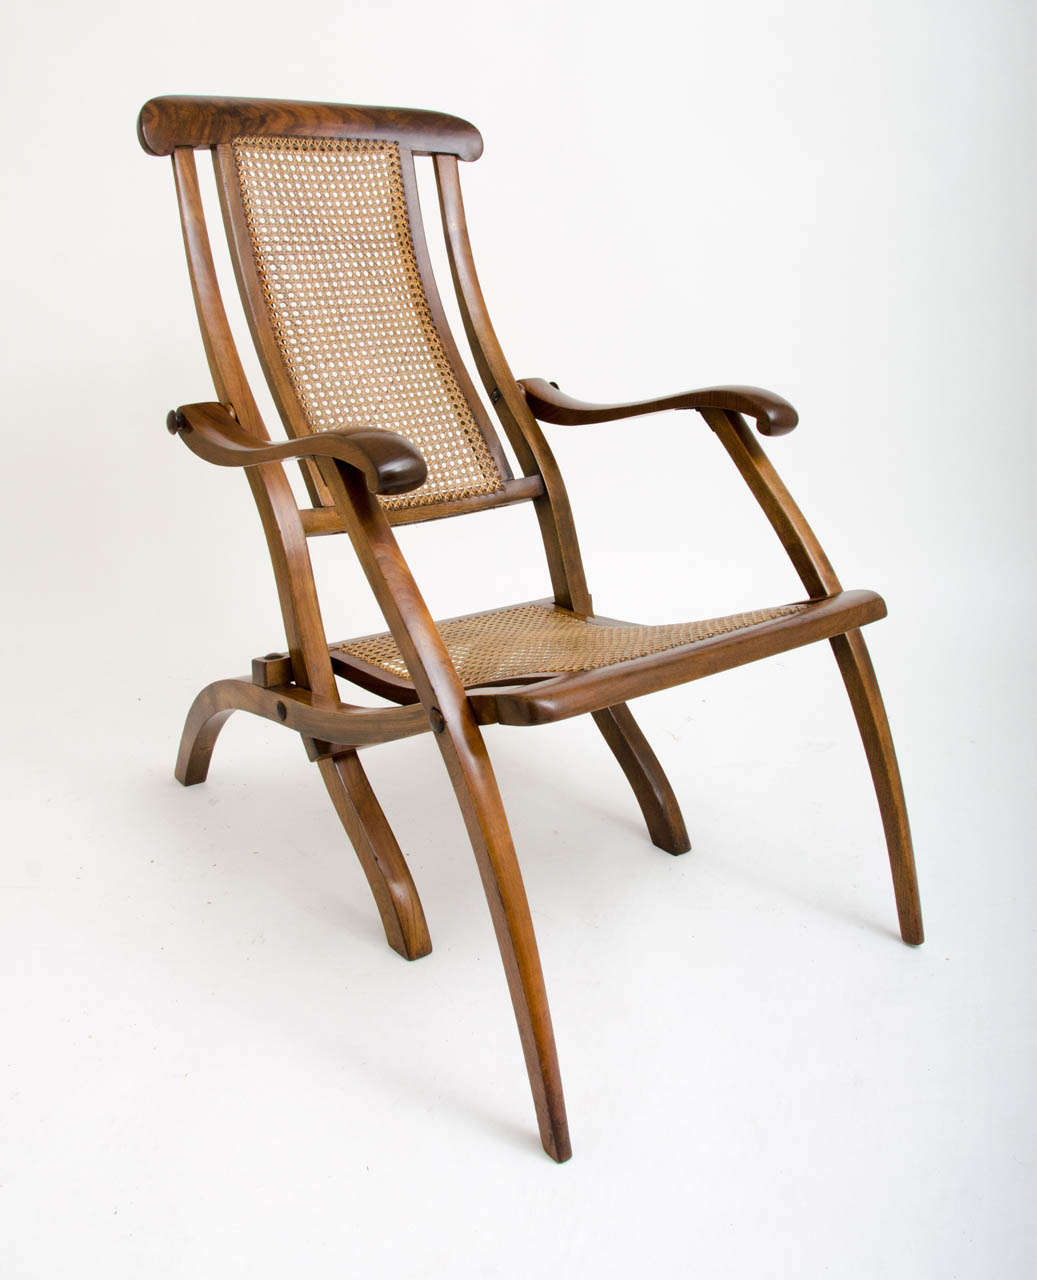 A 19th Century steamer chair with cane seat.